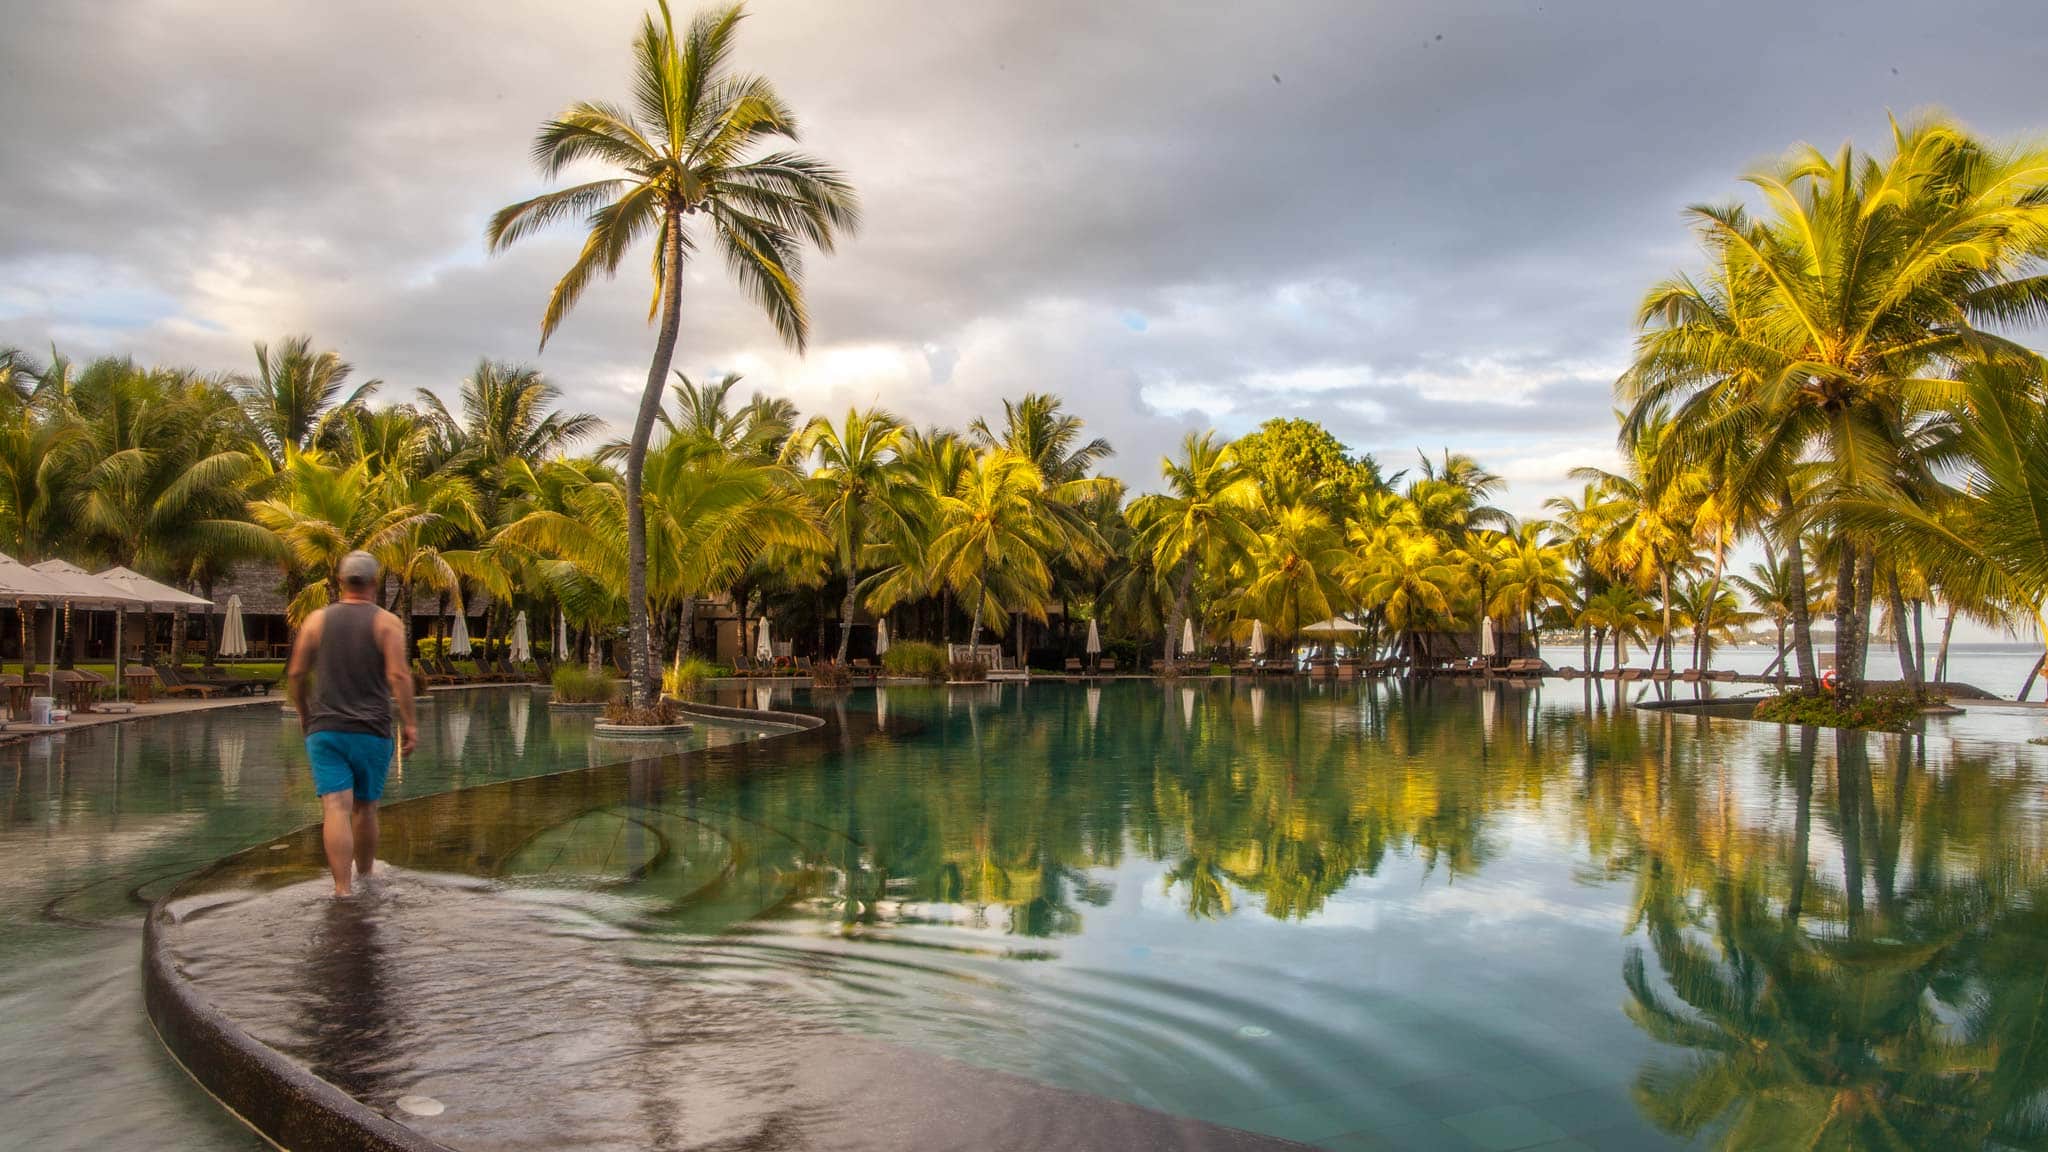 A luxury stay at Mauritius' Trou aux Biches Beachcomber